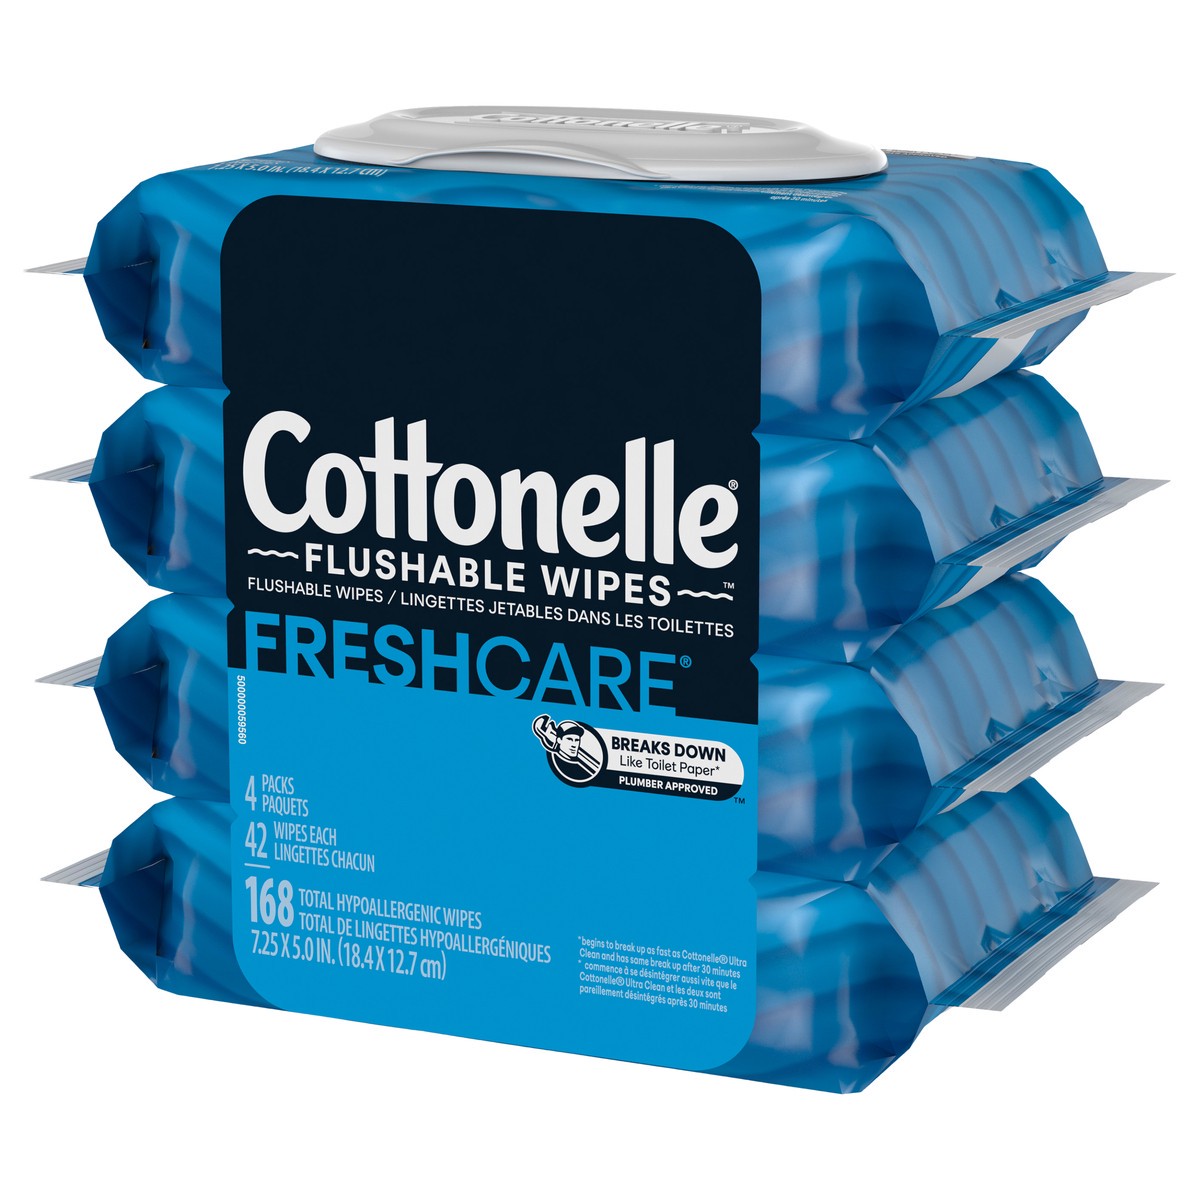 slide 6 of 9, Cottonelle Fresh Care Flushable Wet Wipes, Adult Wet Wipes, 4 Flip-Top Packs, 42 Wipes per Pack (168 Total Flushable Wipes), 4 ct